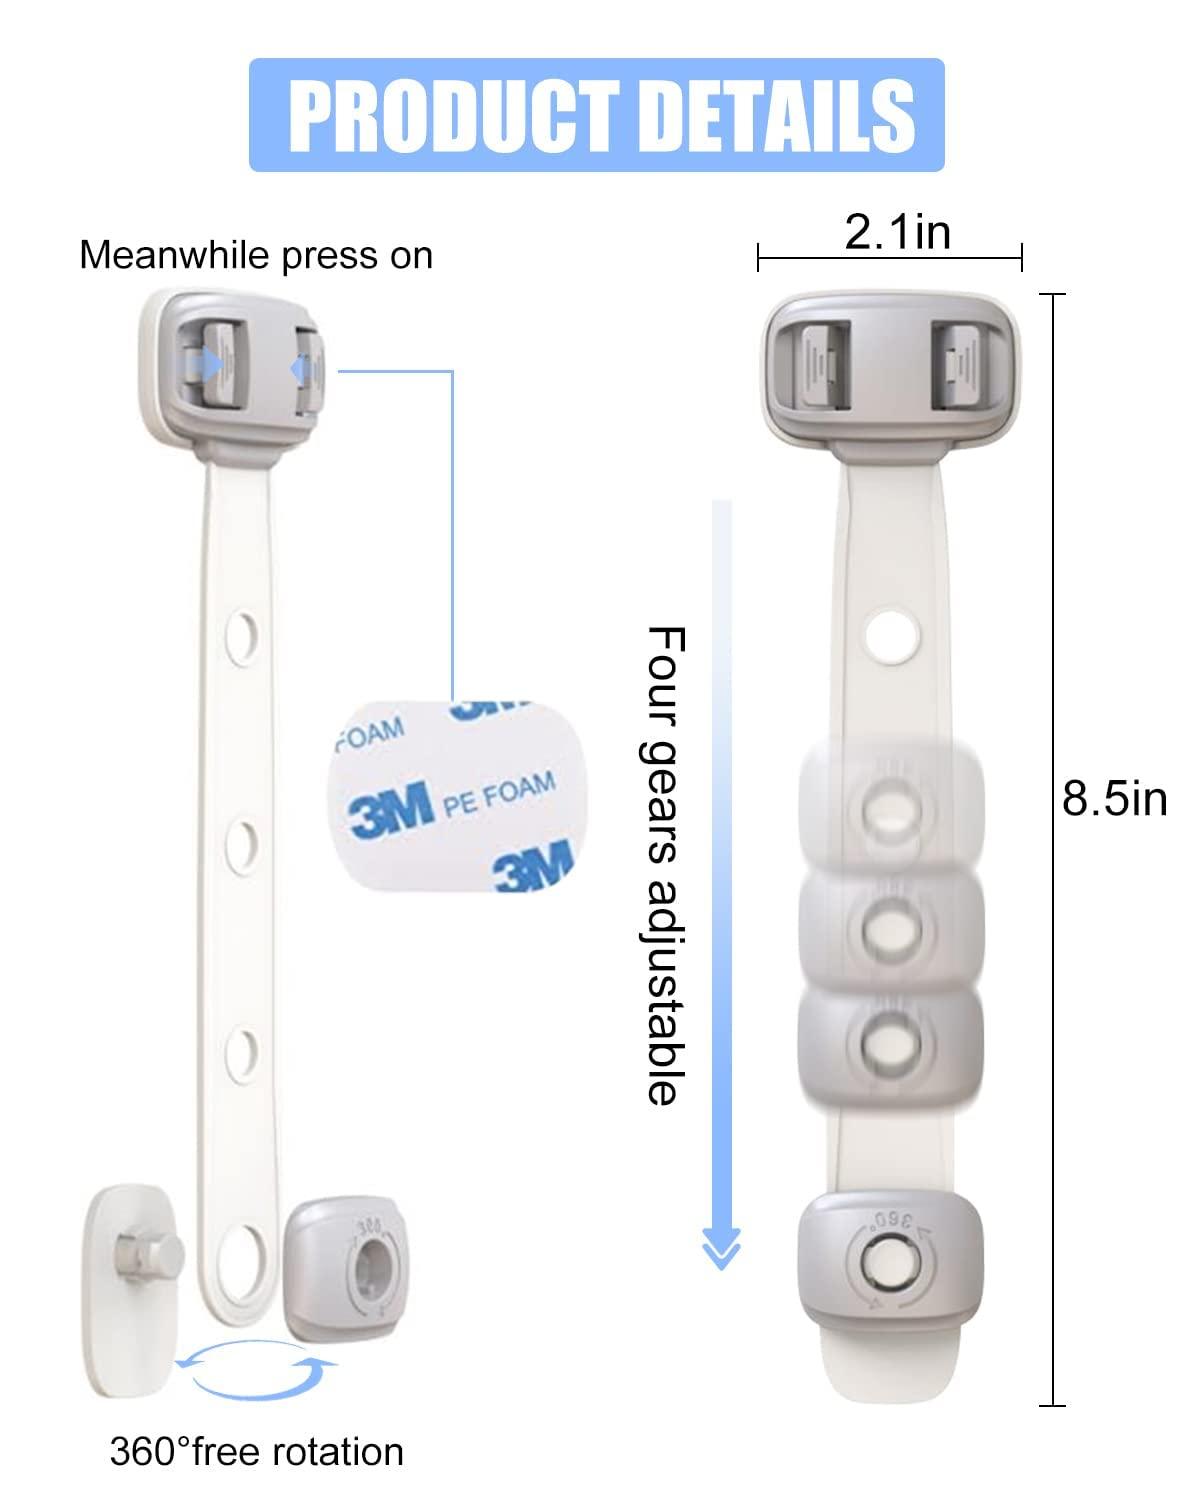 Fridge Locks,Refrigerator Door Lock,Child Proof Safety Cabinet Lock with  Strong 3M Adhesives,Fridge Locks for Kids,Adjustable Strap Multi-Purpose  for Cabinet,Drawers,Freezer,Oven (2 Count (Pack of 1))